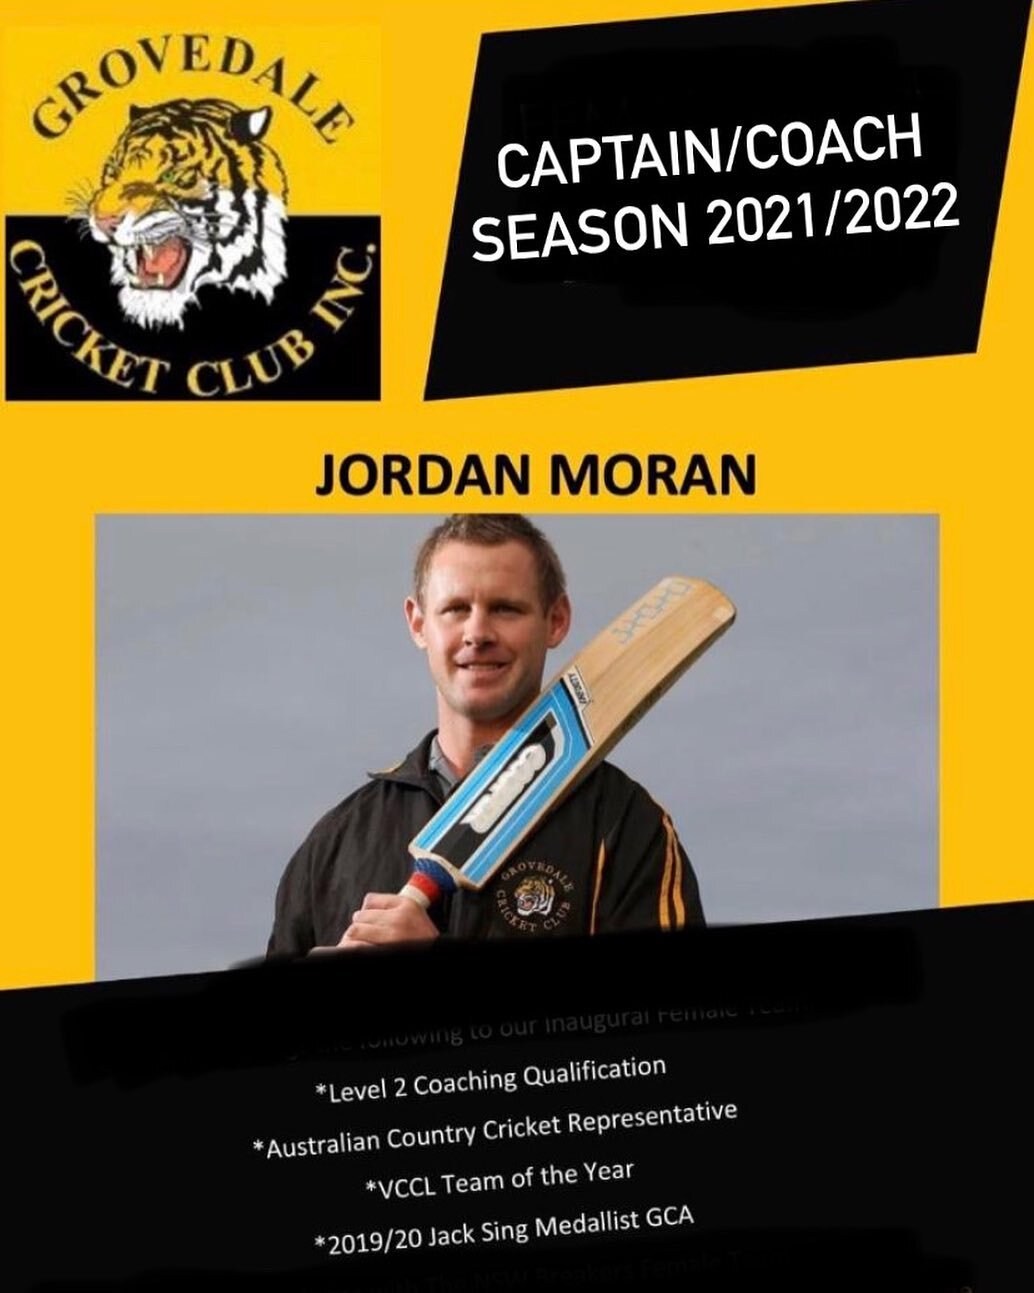 It is with great excitement that the Grovedale Cricket Club announce that @jordanamoran86 has been appointed Captain/Coach for Season 2021/22.  What an unbelievable privilege for our Club to have such a great person with the expertise and passion at 